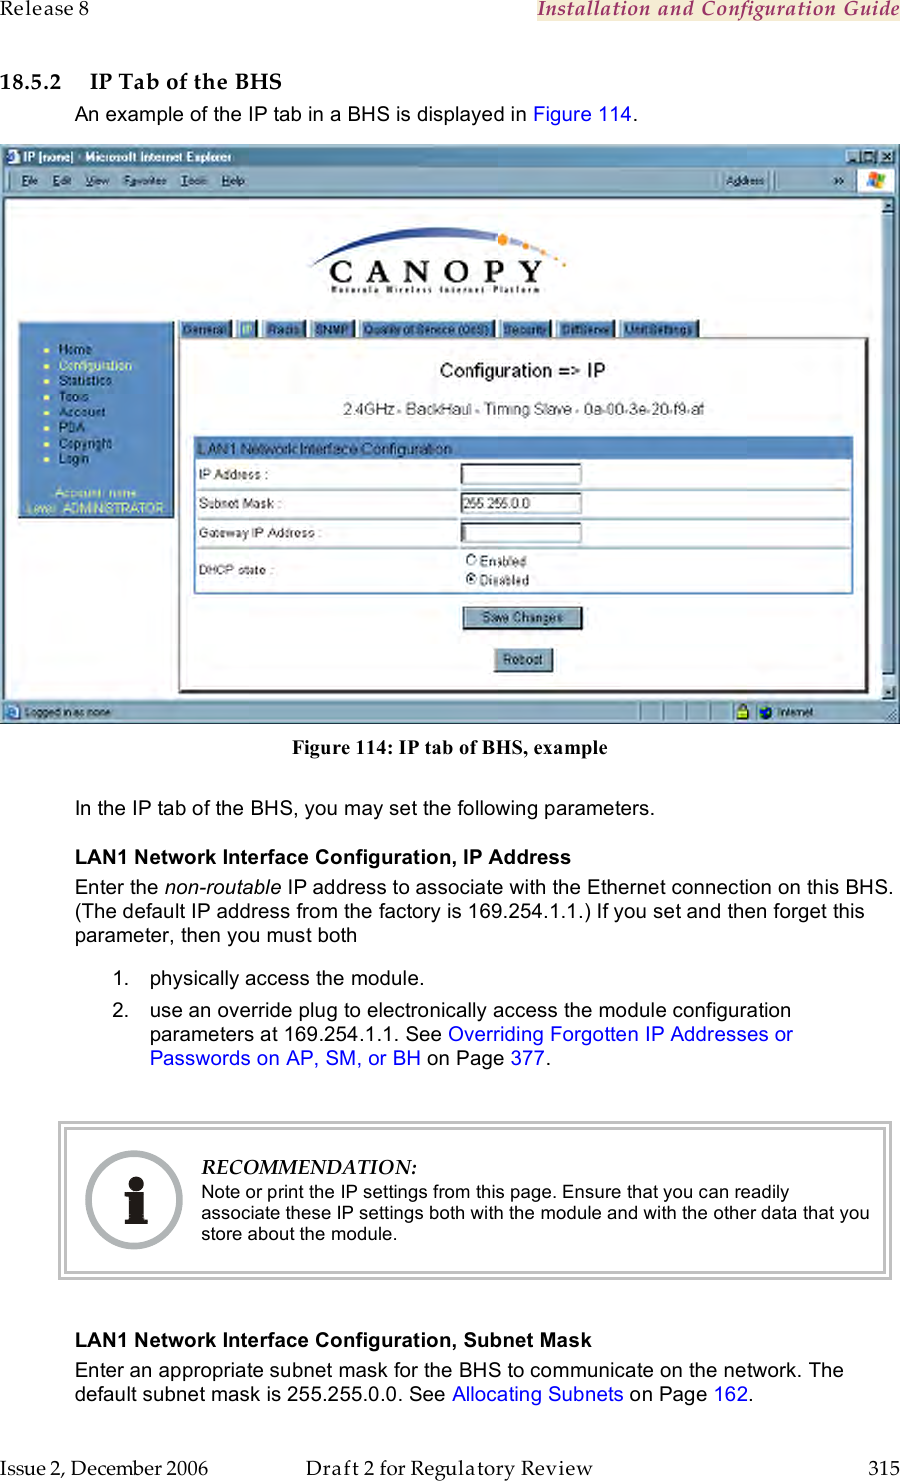 Release 8    Installation and Configuration Guide   Issue 2, December 2006  Draft 2 for Regulatory Review  315     18.5.2 IP Tab of the BHS An example of the IP tab in a BHS is displayed in Figure 114.  Figure 114: IP tab of BHS, example  In the IP tab of the BHS, you may set the following parameters. LAN1 Network Interface Configuration, IP Address Enter the non-routable IP address to associate with the Ethernet connection on this BHS. (The default IP address from the factory is 169.254.1.1.) If you set and then forget this parameter, then you must both 1.  physically access the module. 2.  use an override plug to electronically access the module configuration parameters at 169.254.1.1. See Overriding Forgotten IP Addresses or Passwords on AP, SM, or BH on Page 377.   RECOMMENDATION: Note or print the IP settings from this page. Ensure that you can readily associate these IP settings both with the module and with the other data that you store about the module.  LAN1 Network Interface Configuration, Subnet Mask Enter an appropriate subnet mask for the BHS to communicate on the network. The default subnet mask is 255.255.0.0. See Allocating Subnets on Page 162. 